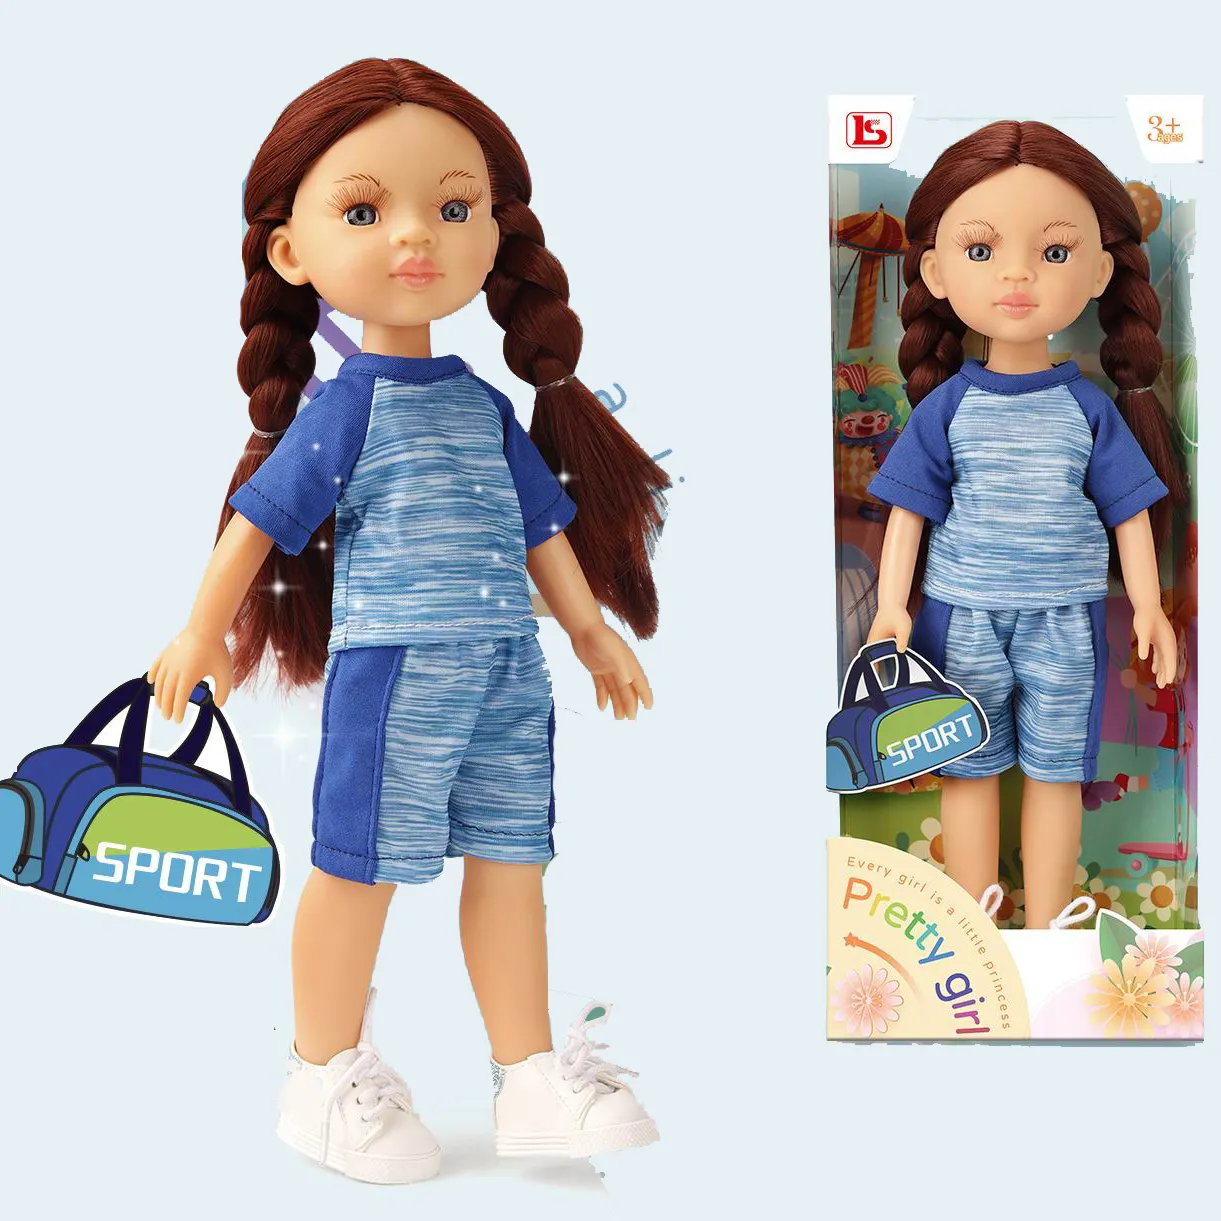 Fashion Doll with sport Clothes white Shoes and bag 13 Inch pretty Girl full Body vinyl baby Doll toy for Kids